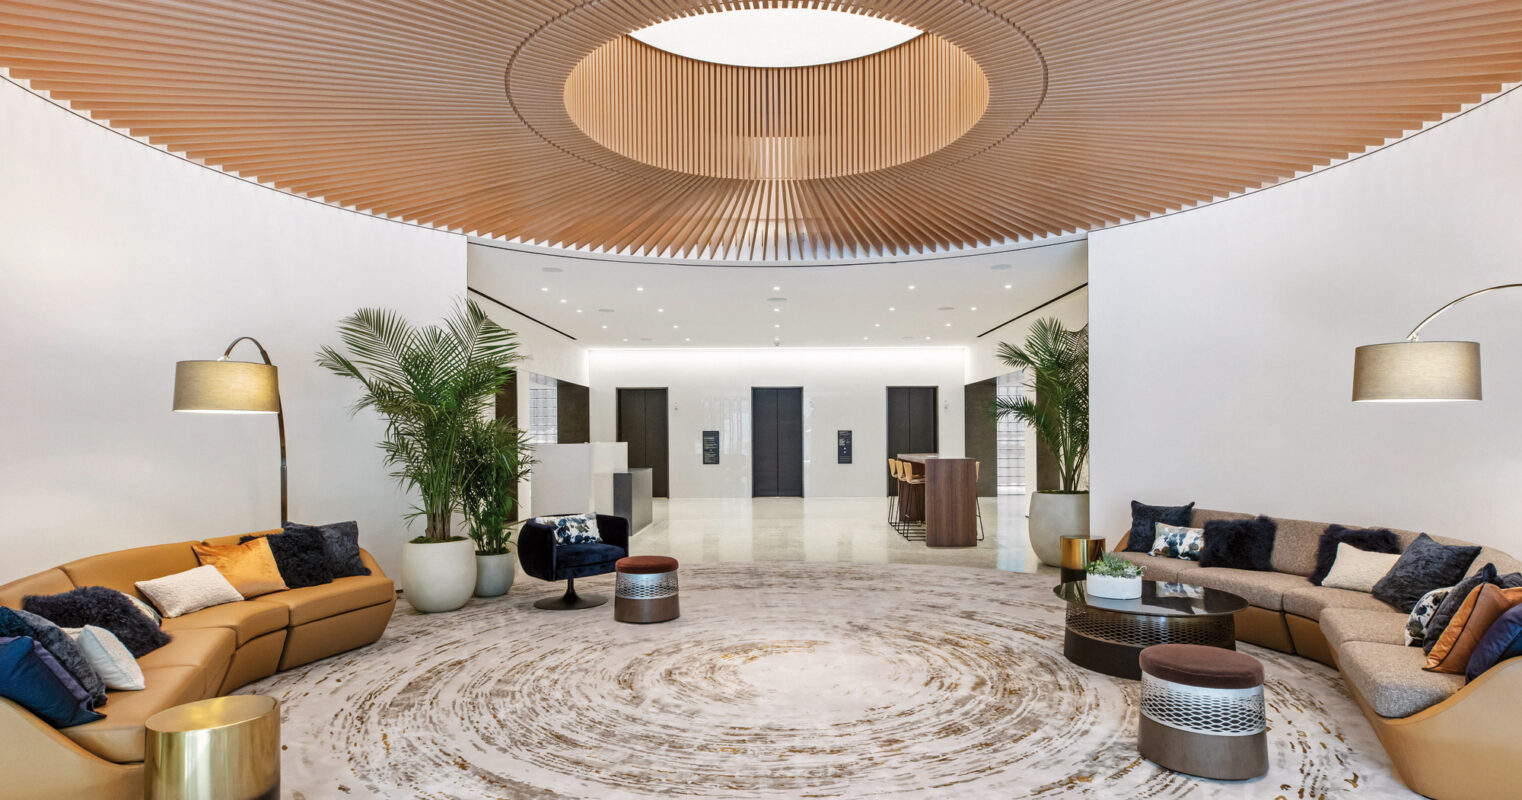 Elegant modern lobby with circular patterned marble floor, wooden slatted ceiling design, and sleek, comfortable seating area complemented by lush indoor plants.